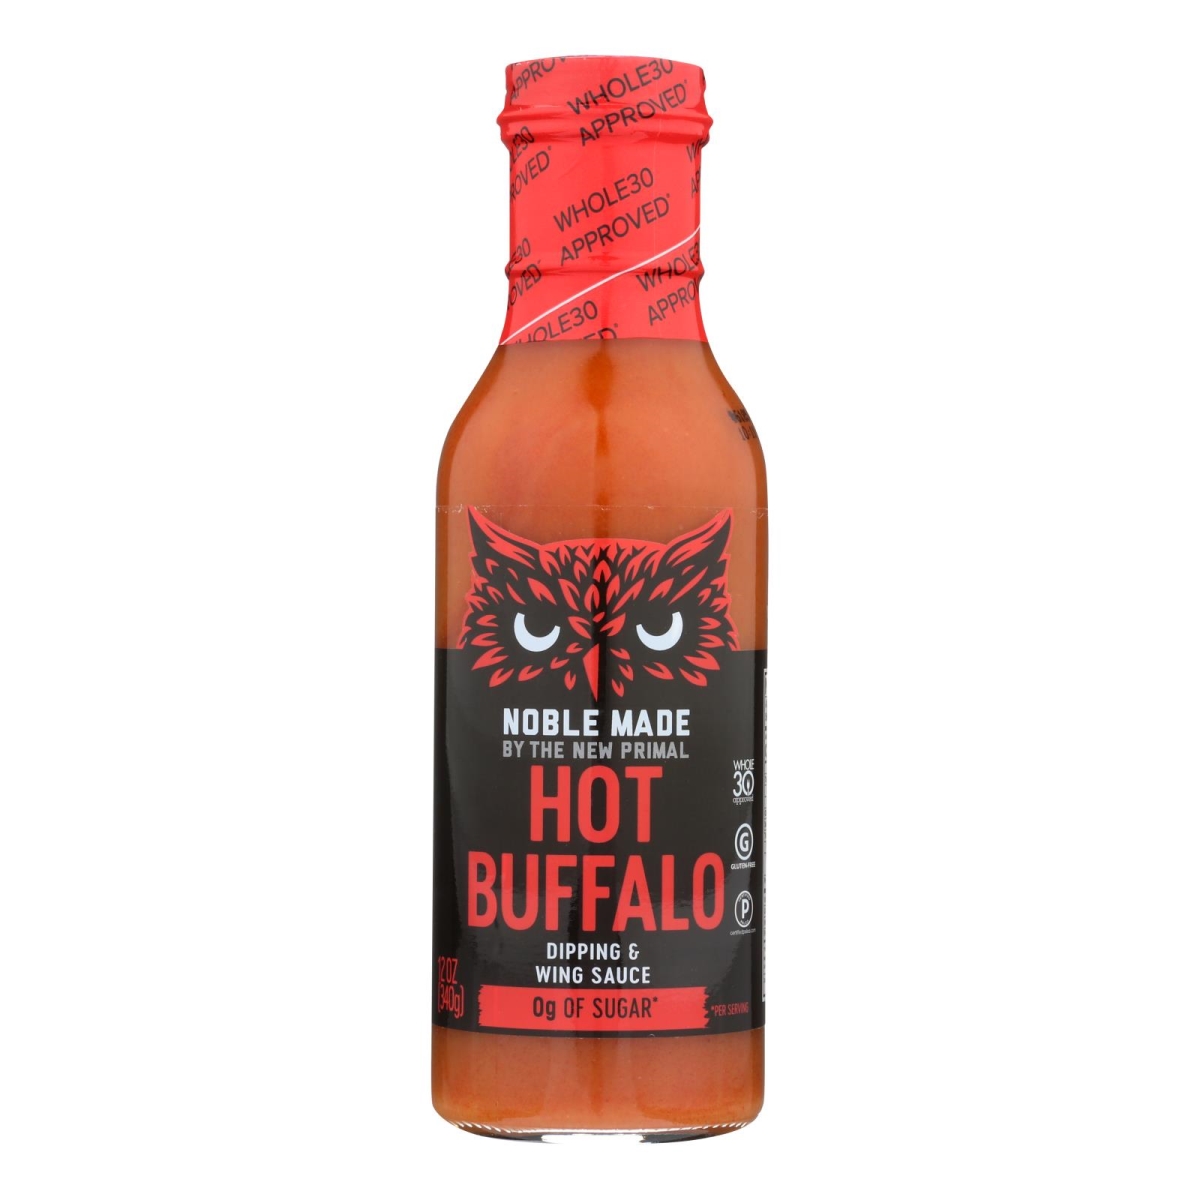 Picture of Noble Made by The New Primal HG2278166 12 oz The New Primal Buffalo Hot Paleo Sauce - Case of 6